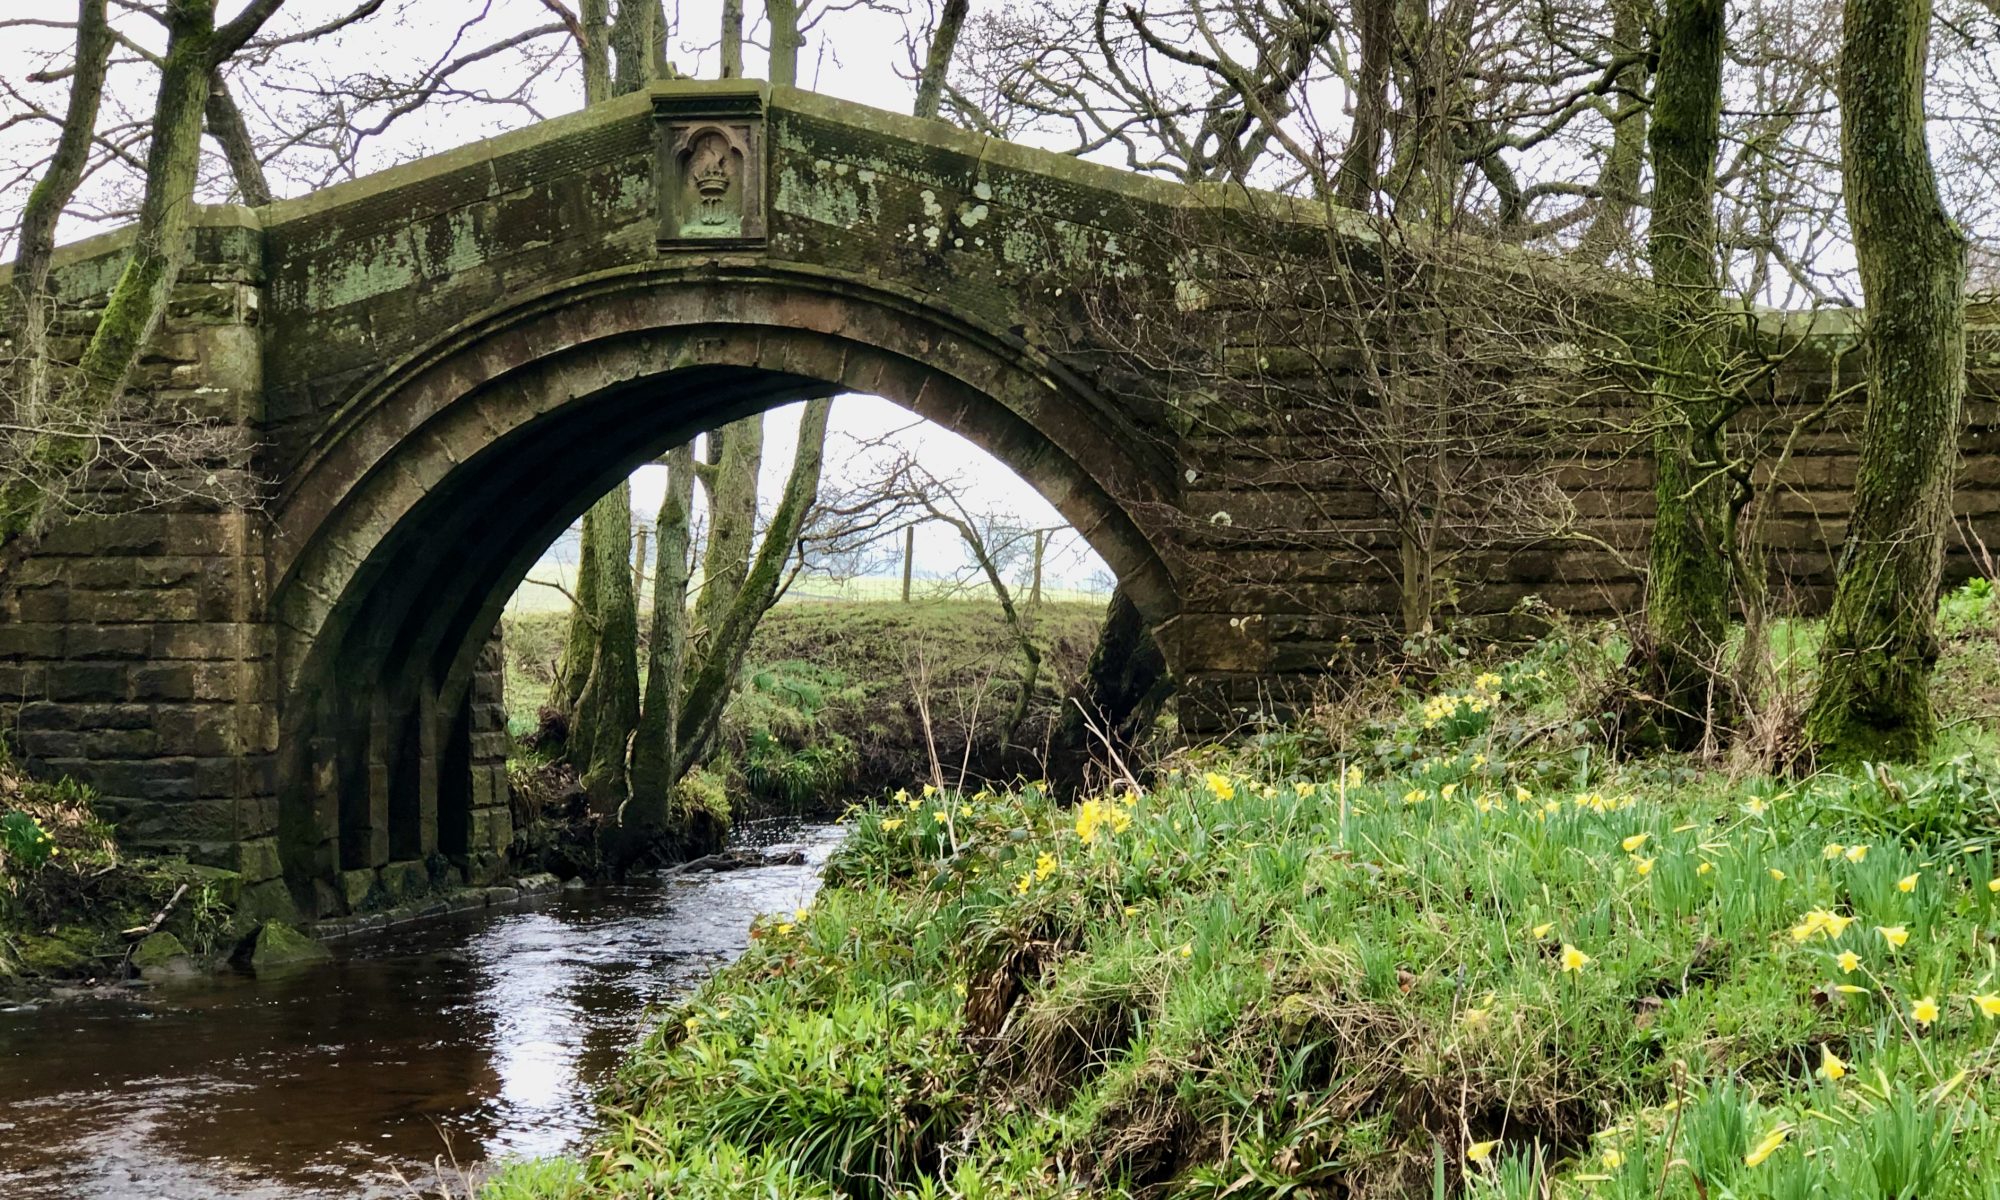 Close up of a single arch packhorse spanning the infant River Esk. Daffodils are in flower on the right-hand bank.